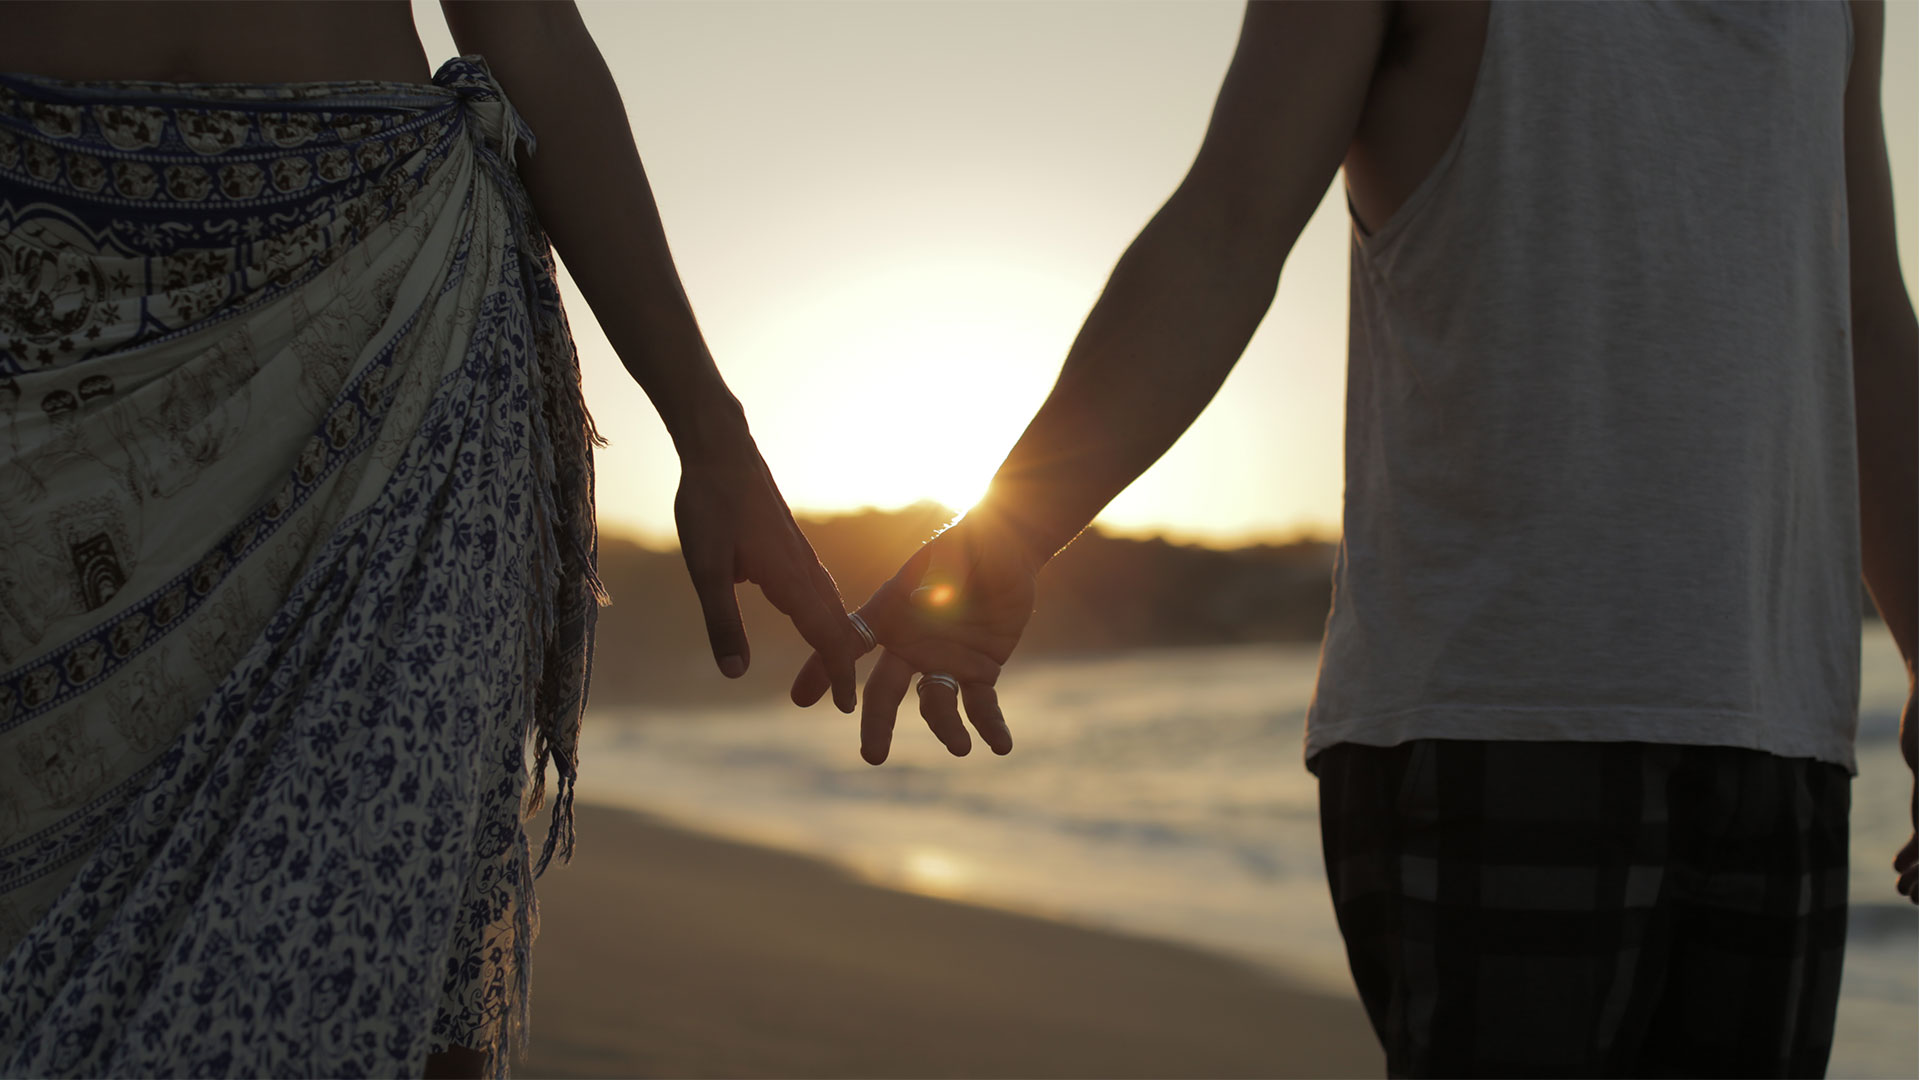 a close up of two people holding hands on a beach, backlit by a setting sun